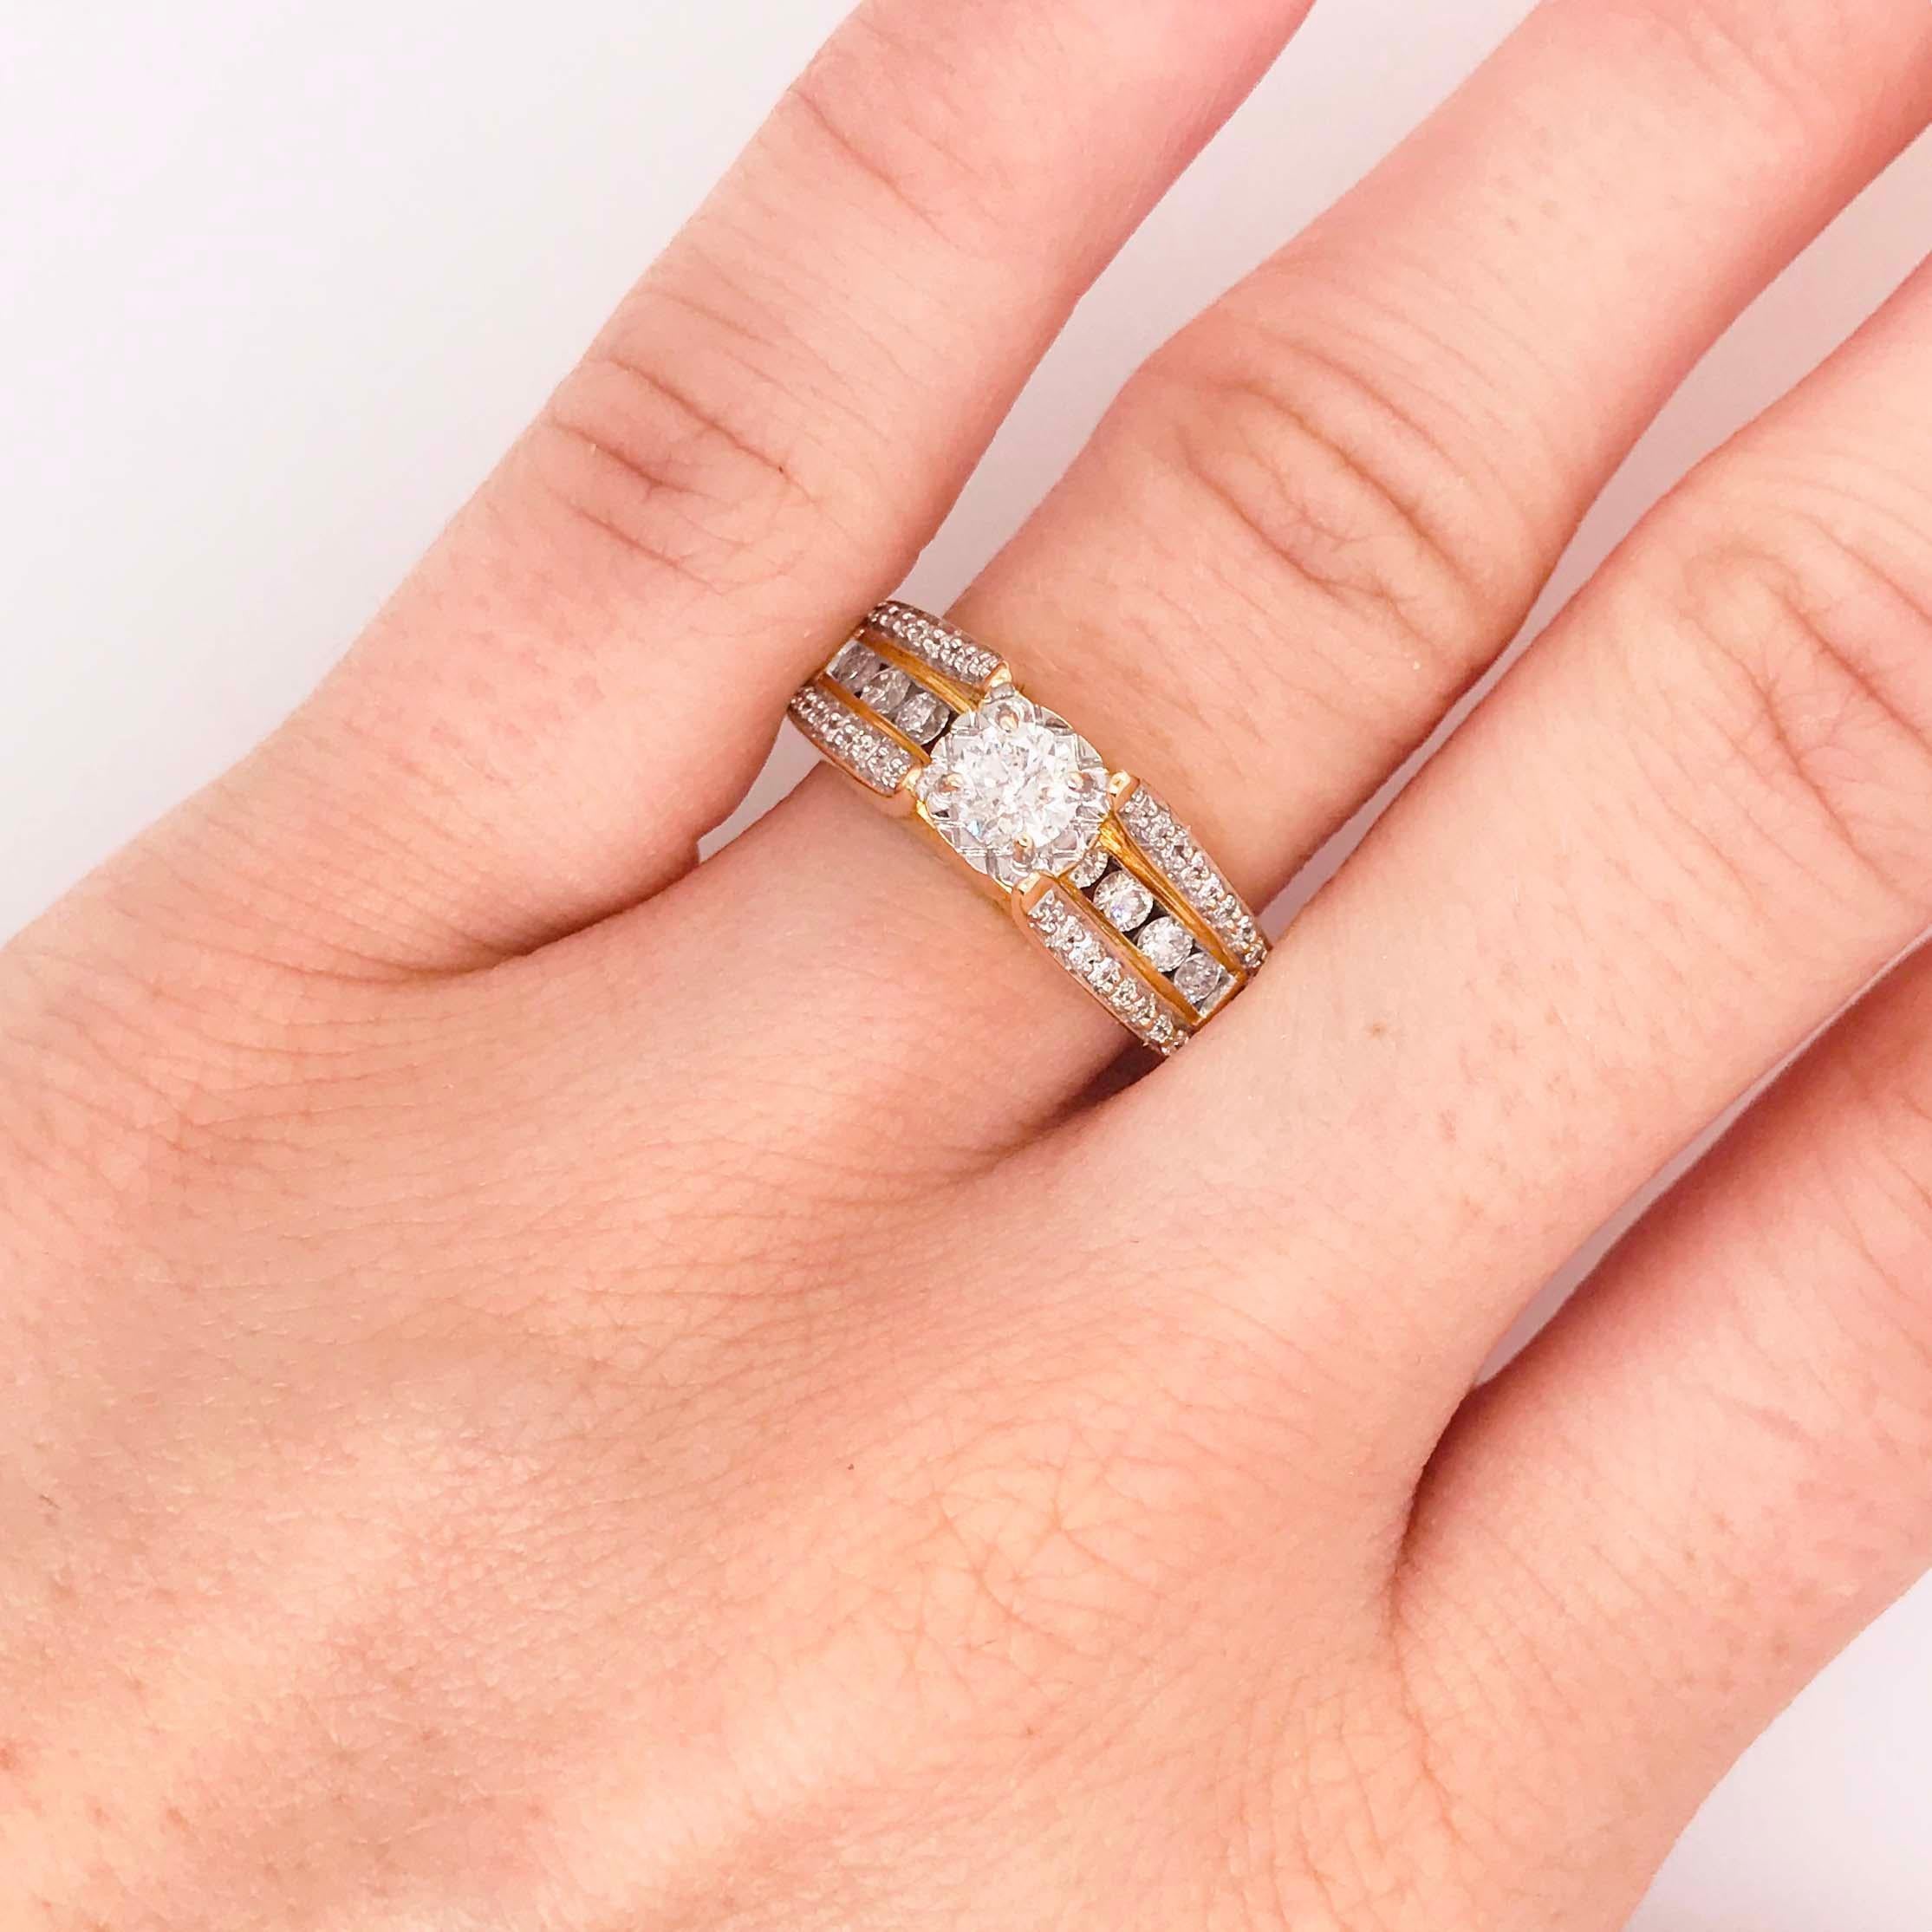 This diamond engagement ring is a custom diamond ring! With a round brilliant diamond set in the center. This diamond engagement ring has a bold diamond band design that is special to this piece. The band has a round diamond, channel set that goes